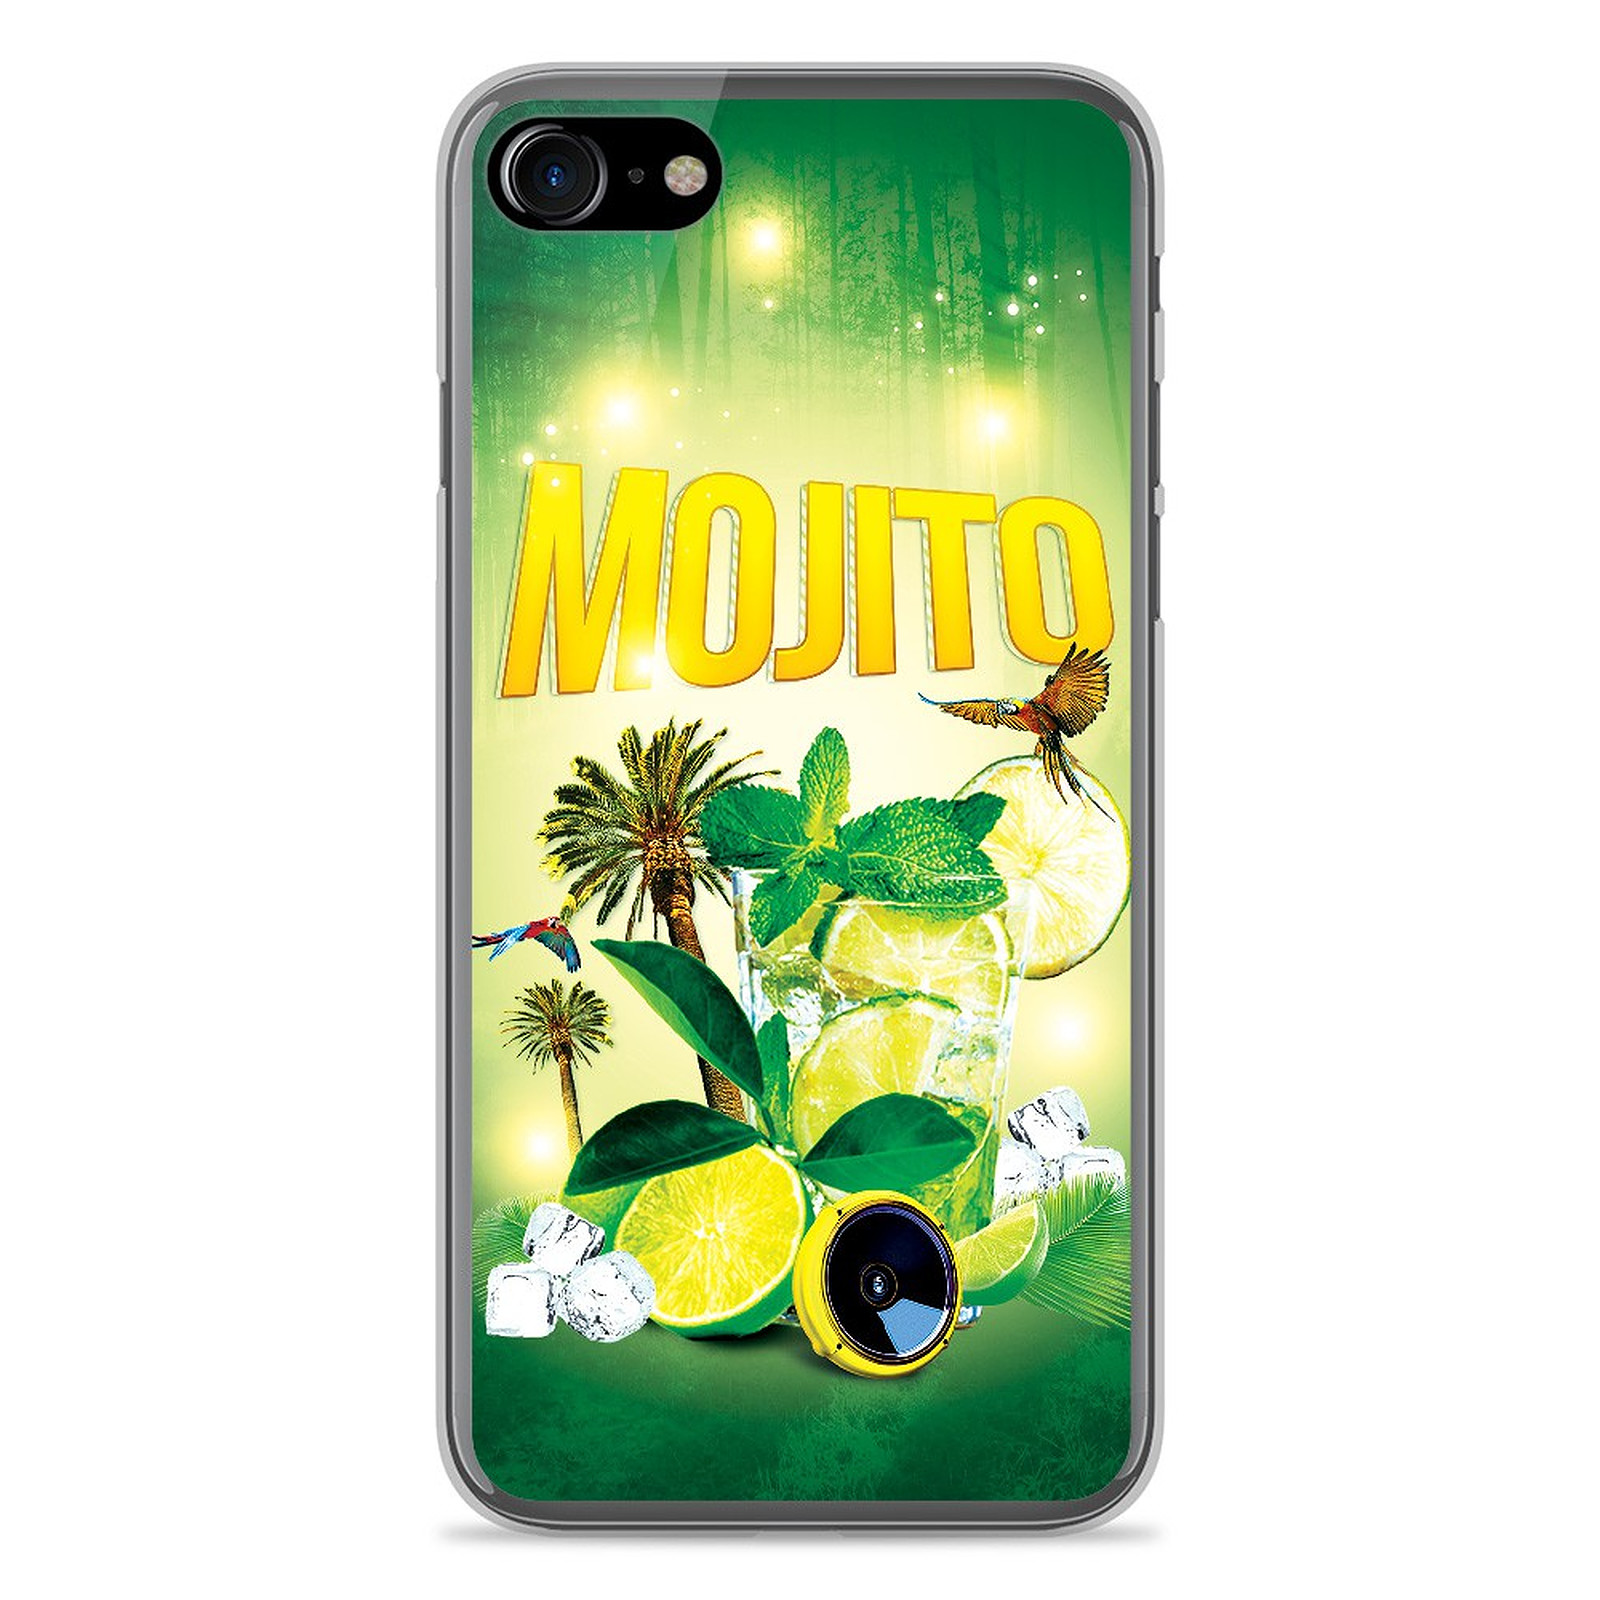 1001 Coques Coque silicone gel Apple IPhone 8 motif Mojito foret - Coque telephone 1001Coques